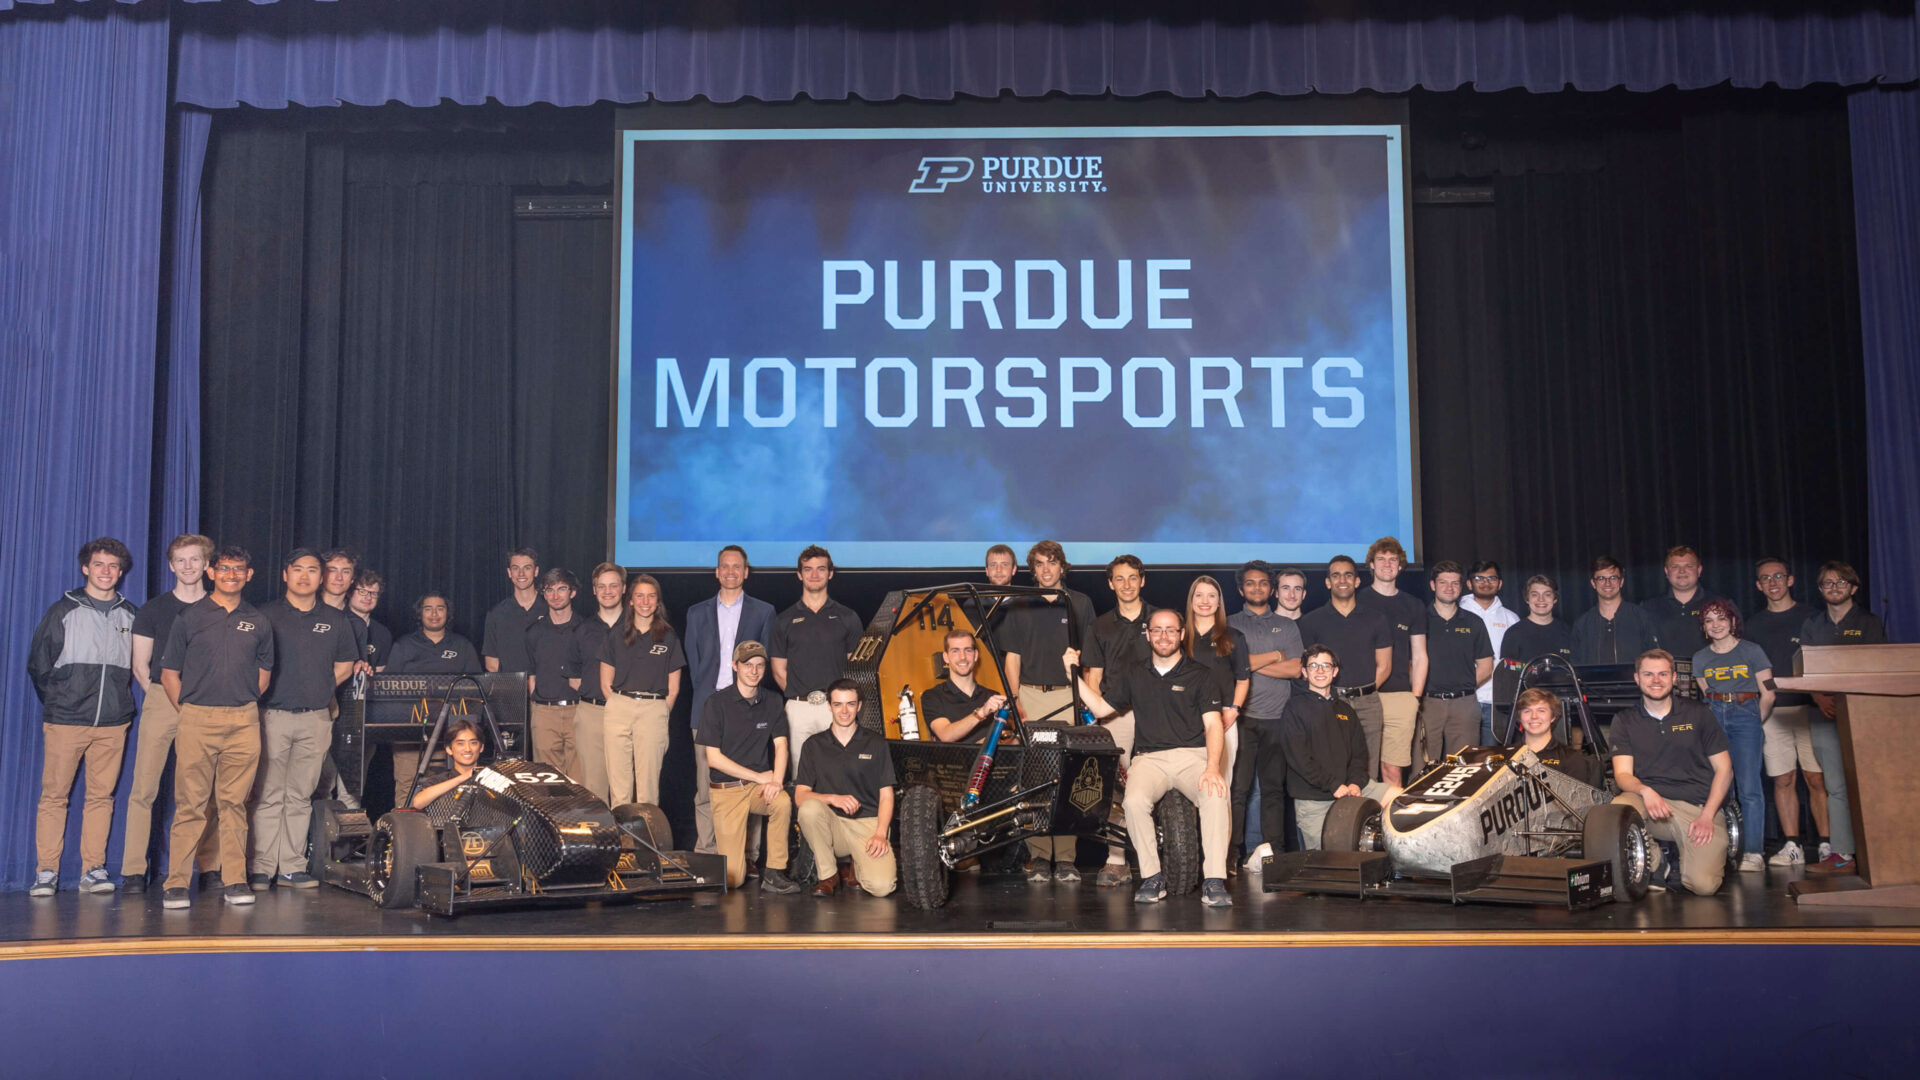 Boilermakers who are part of the Purdue Formula Society of Automotive Engineers (SAE) student organization.